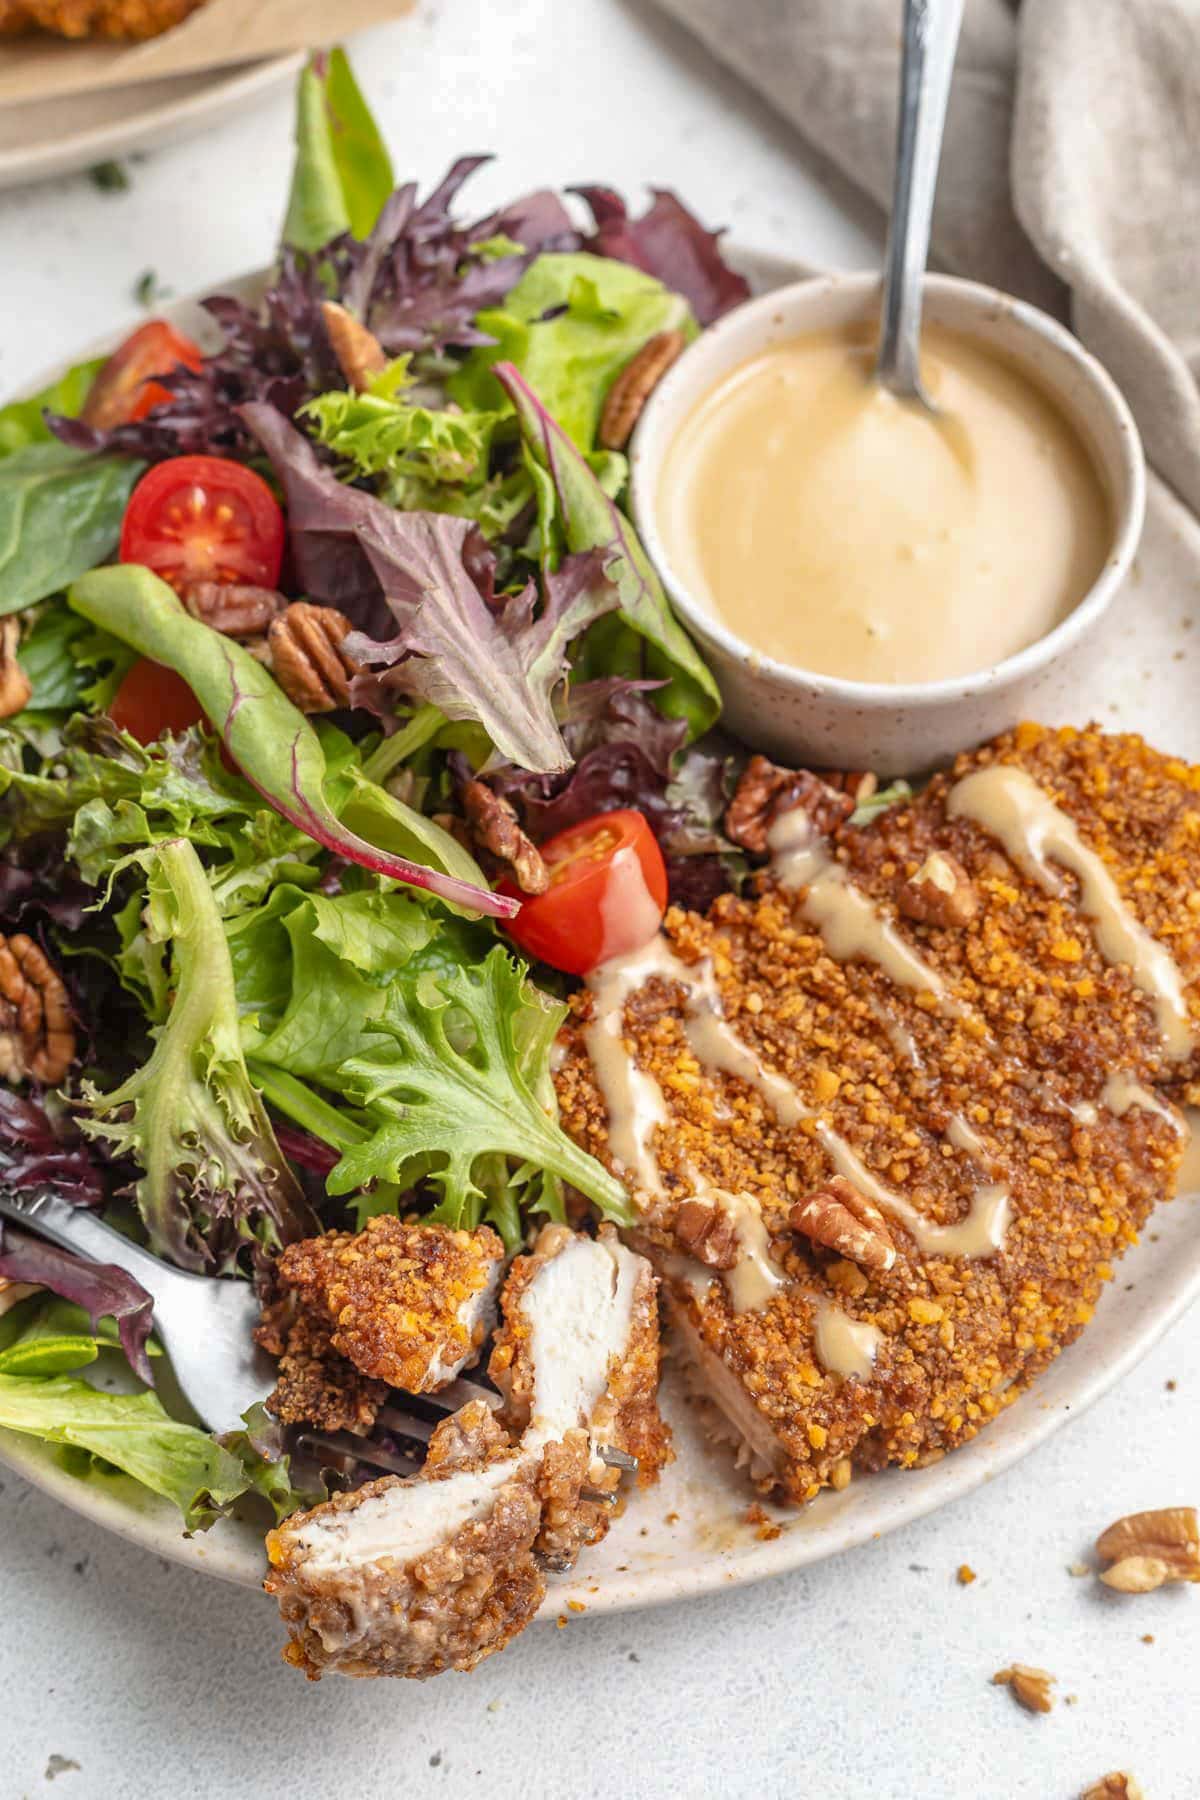 A crispy, pecan-crusted chicken breast cooked in the air fryer then plated with a small salad and a ramekin of honey mustard.